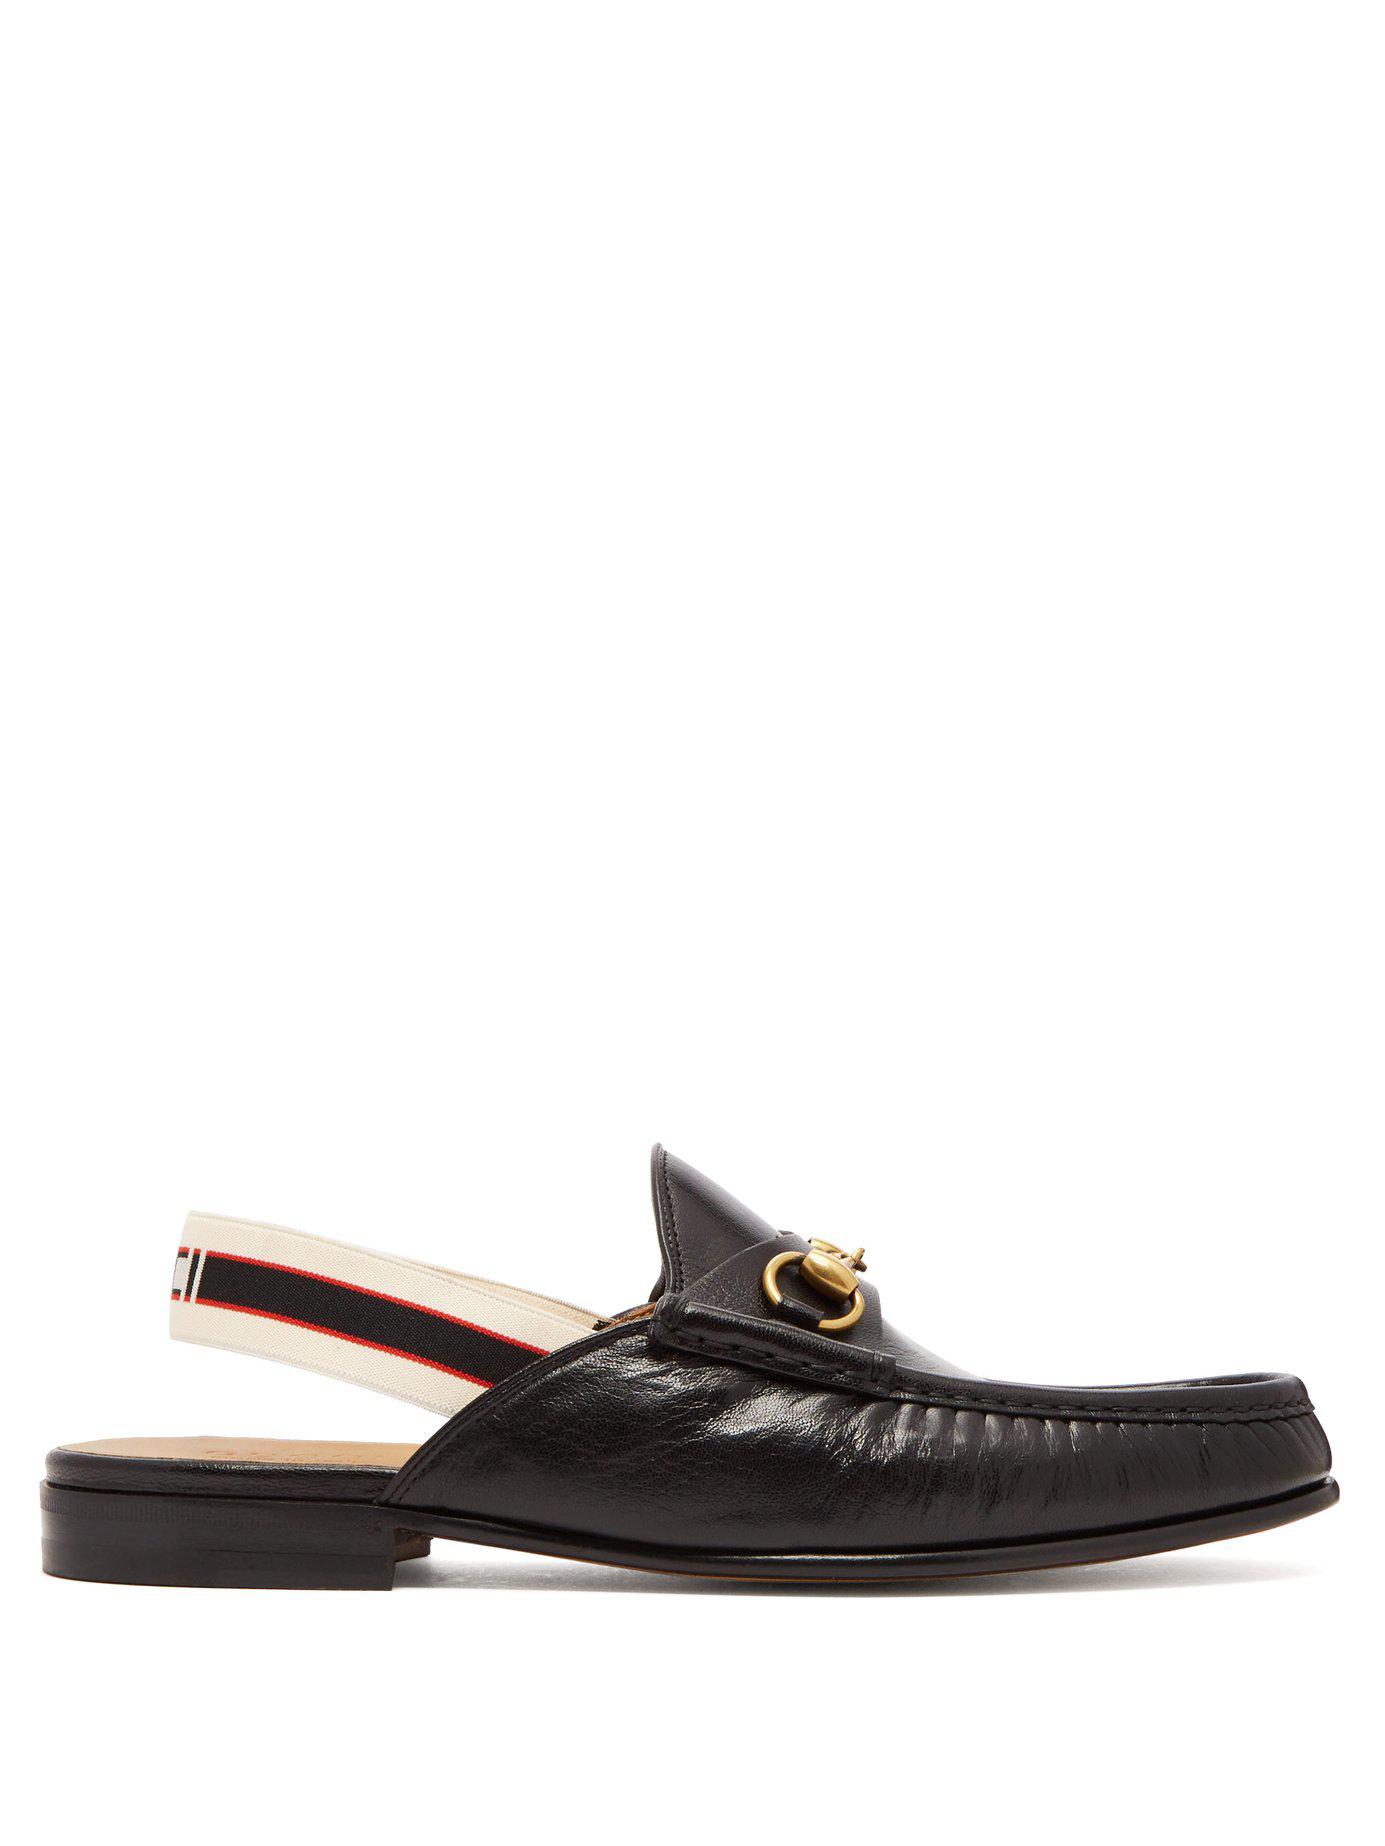 Gucci Horsebit Slingback Strap Backless Leather Loafers in Black for Men |  Lyst